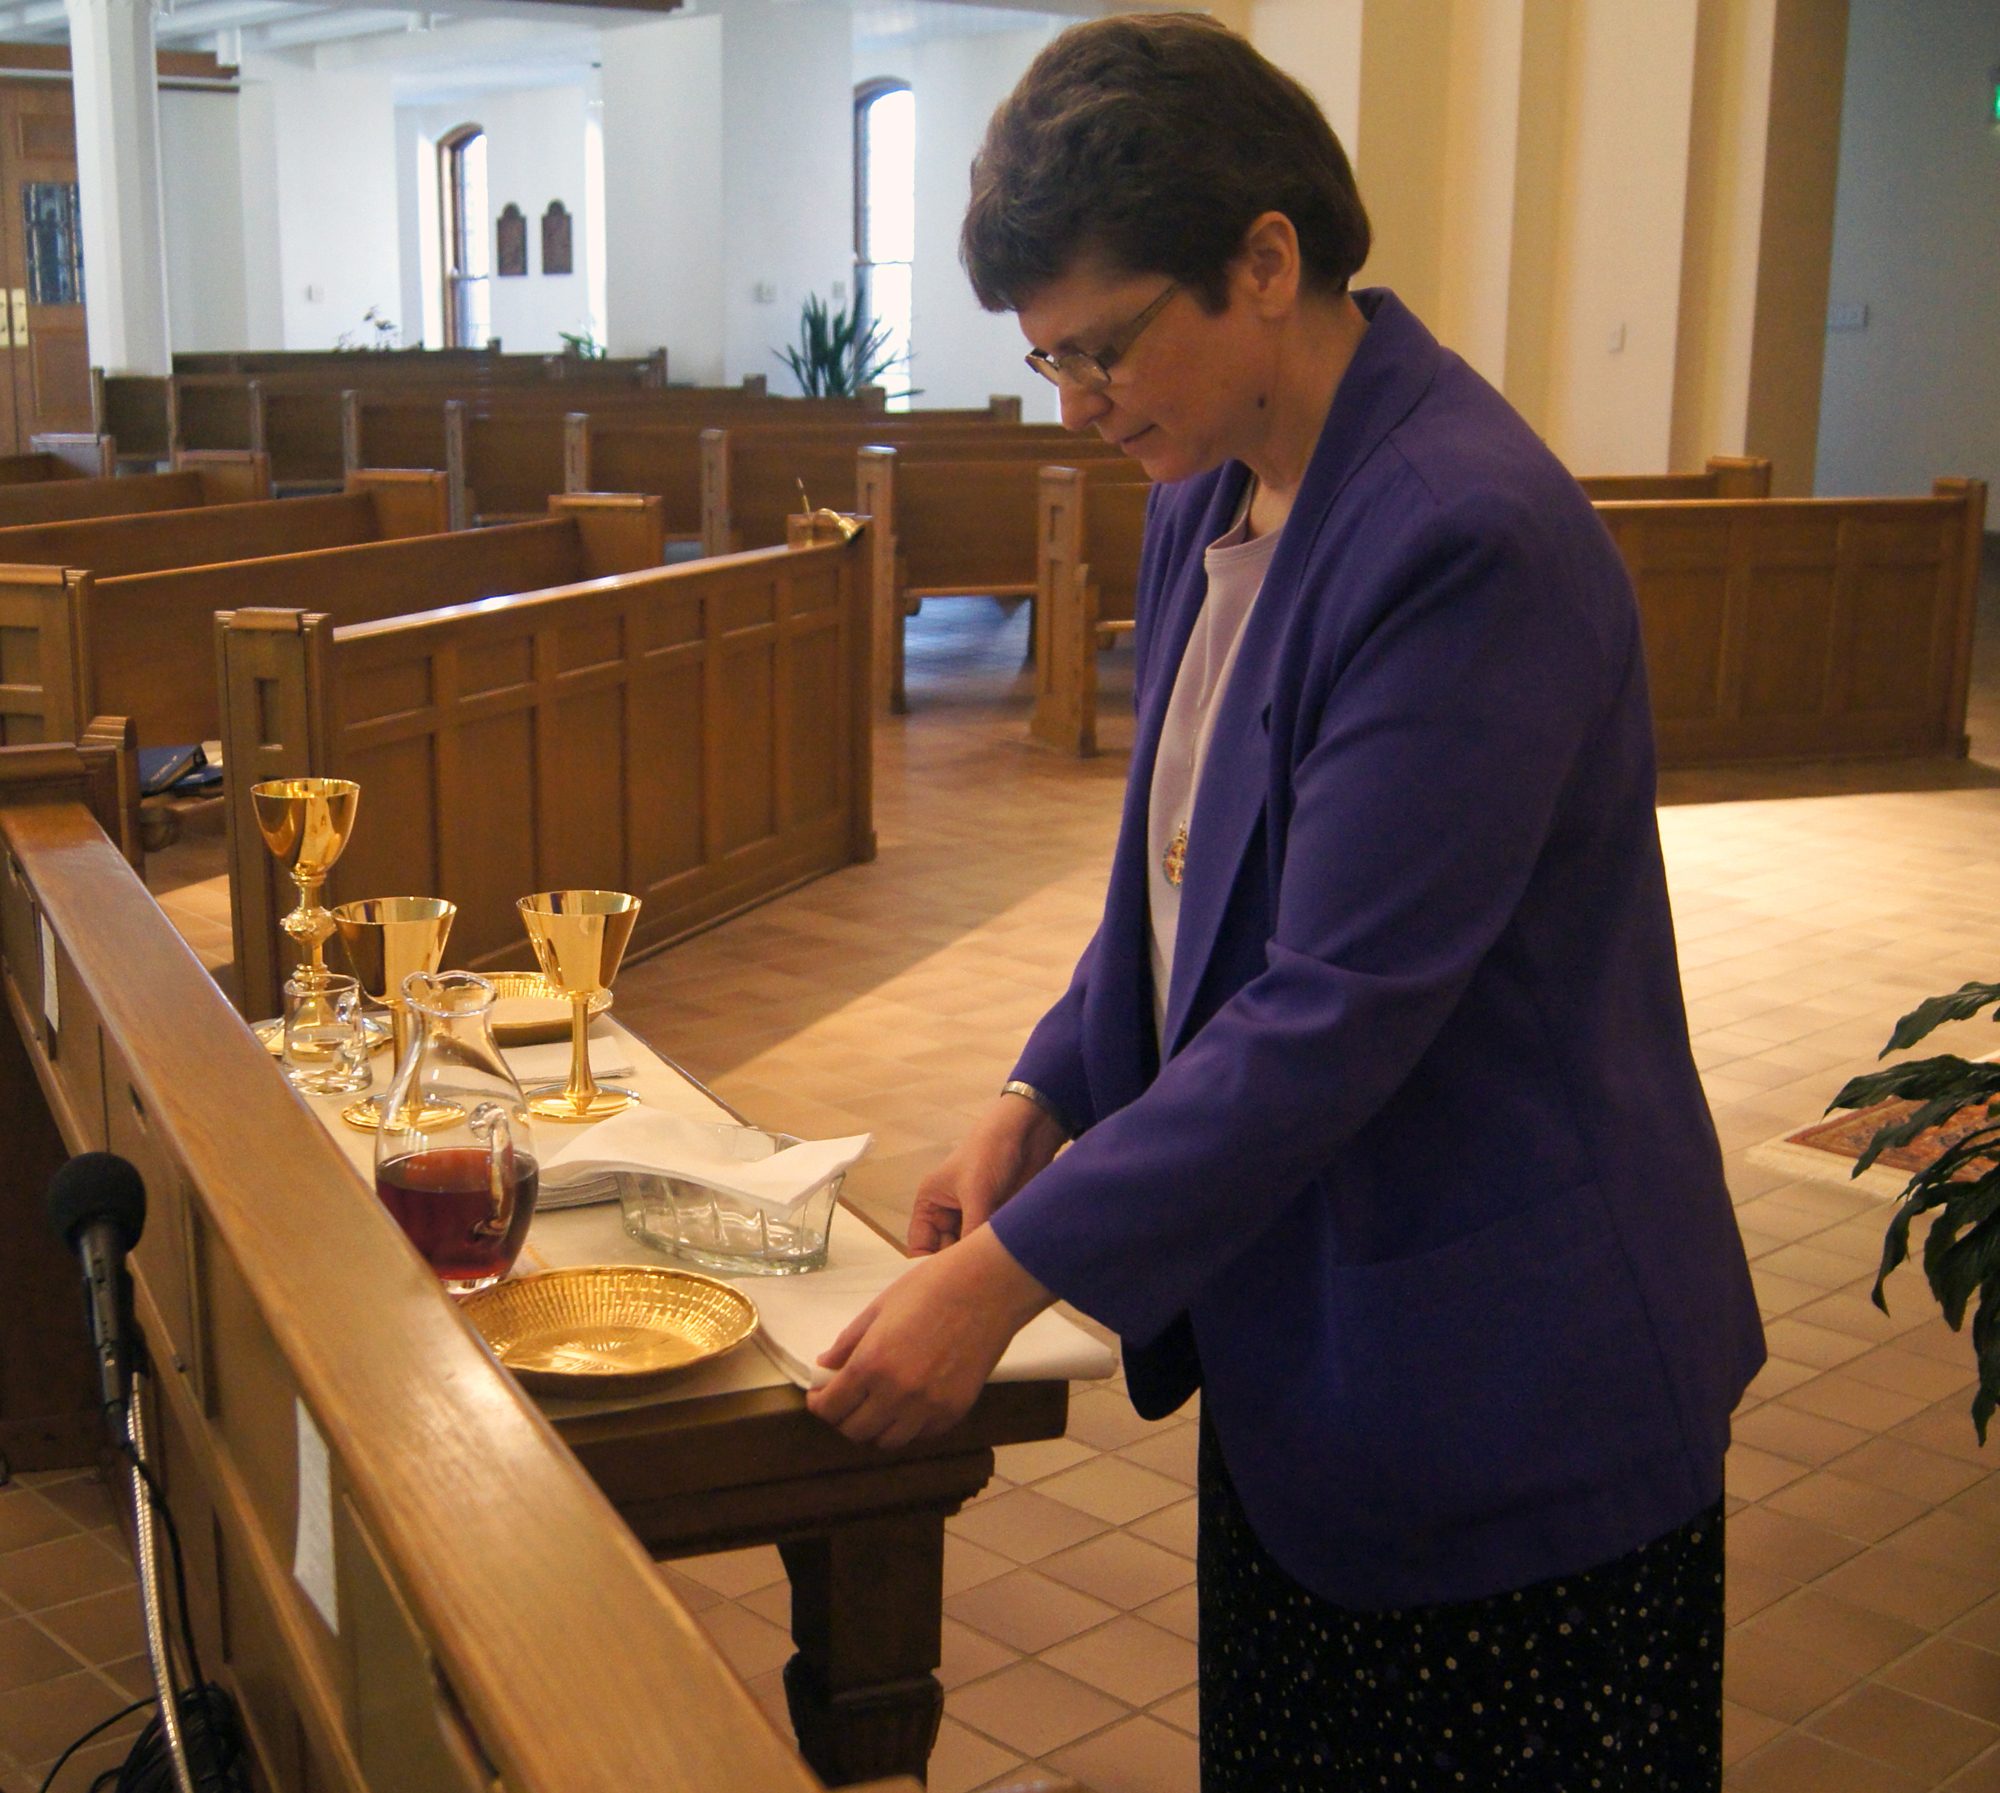 As sacristan, Sister Kathleen Del Monte lays out the credence table in preparation for Eucharist